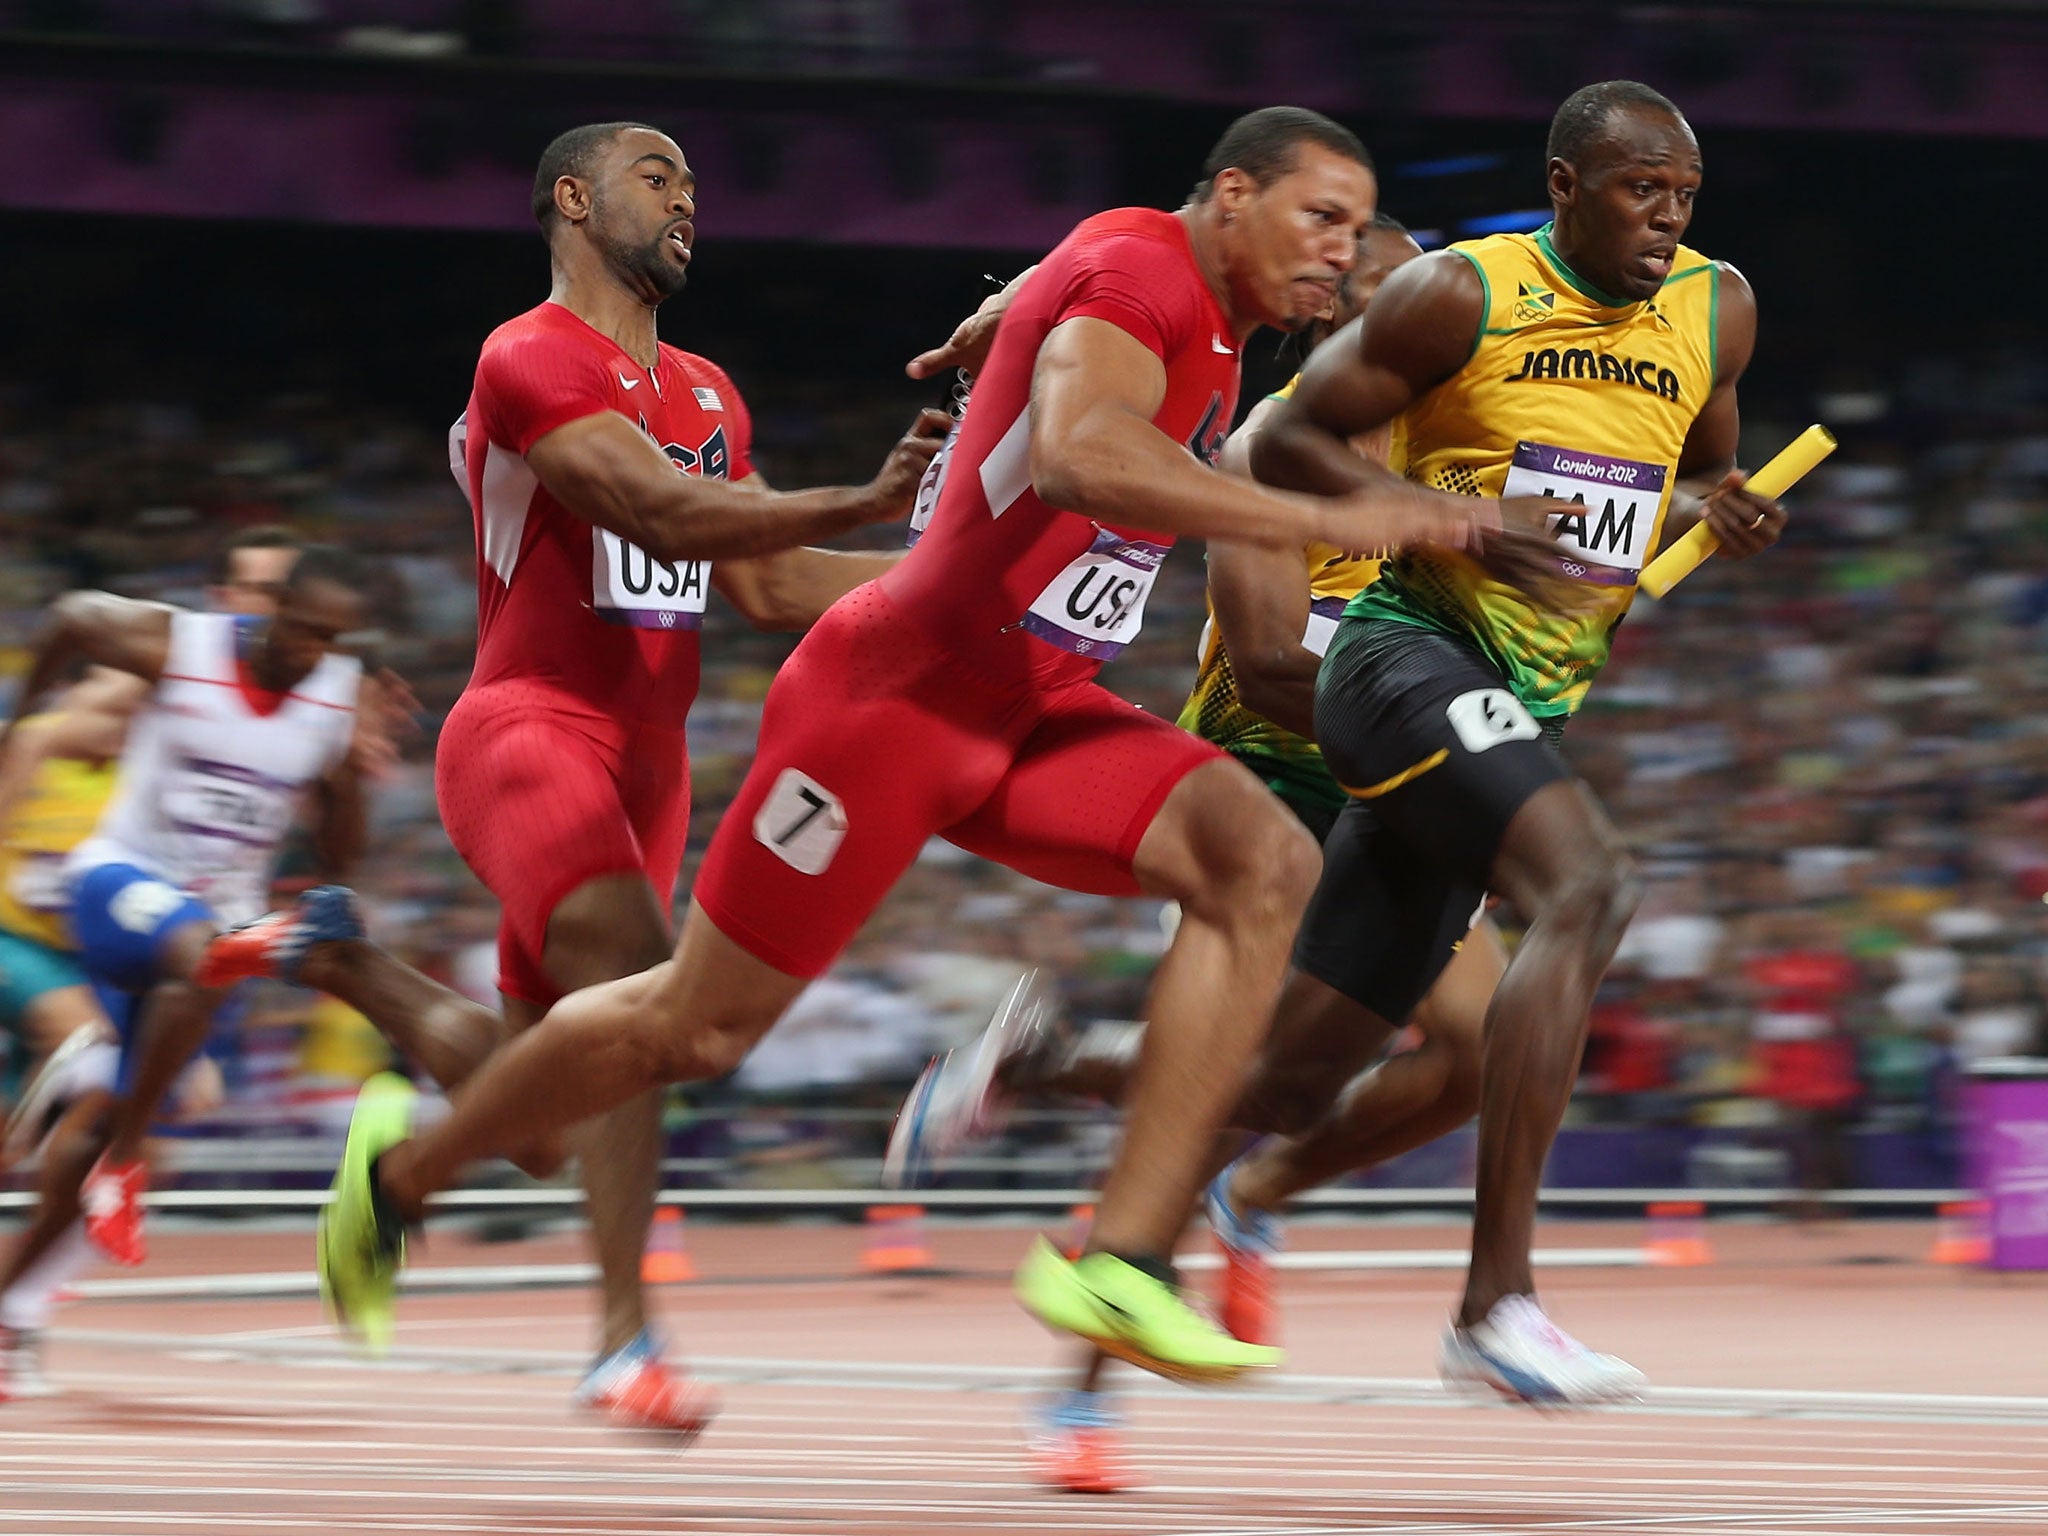 Jamaica’s Usain Bolt (right) sprints away from Ryan Bailey as Tyson Gay hands on the United States baton in the 4x100m final at London 2012